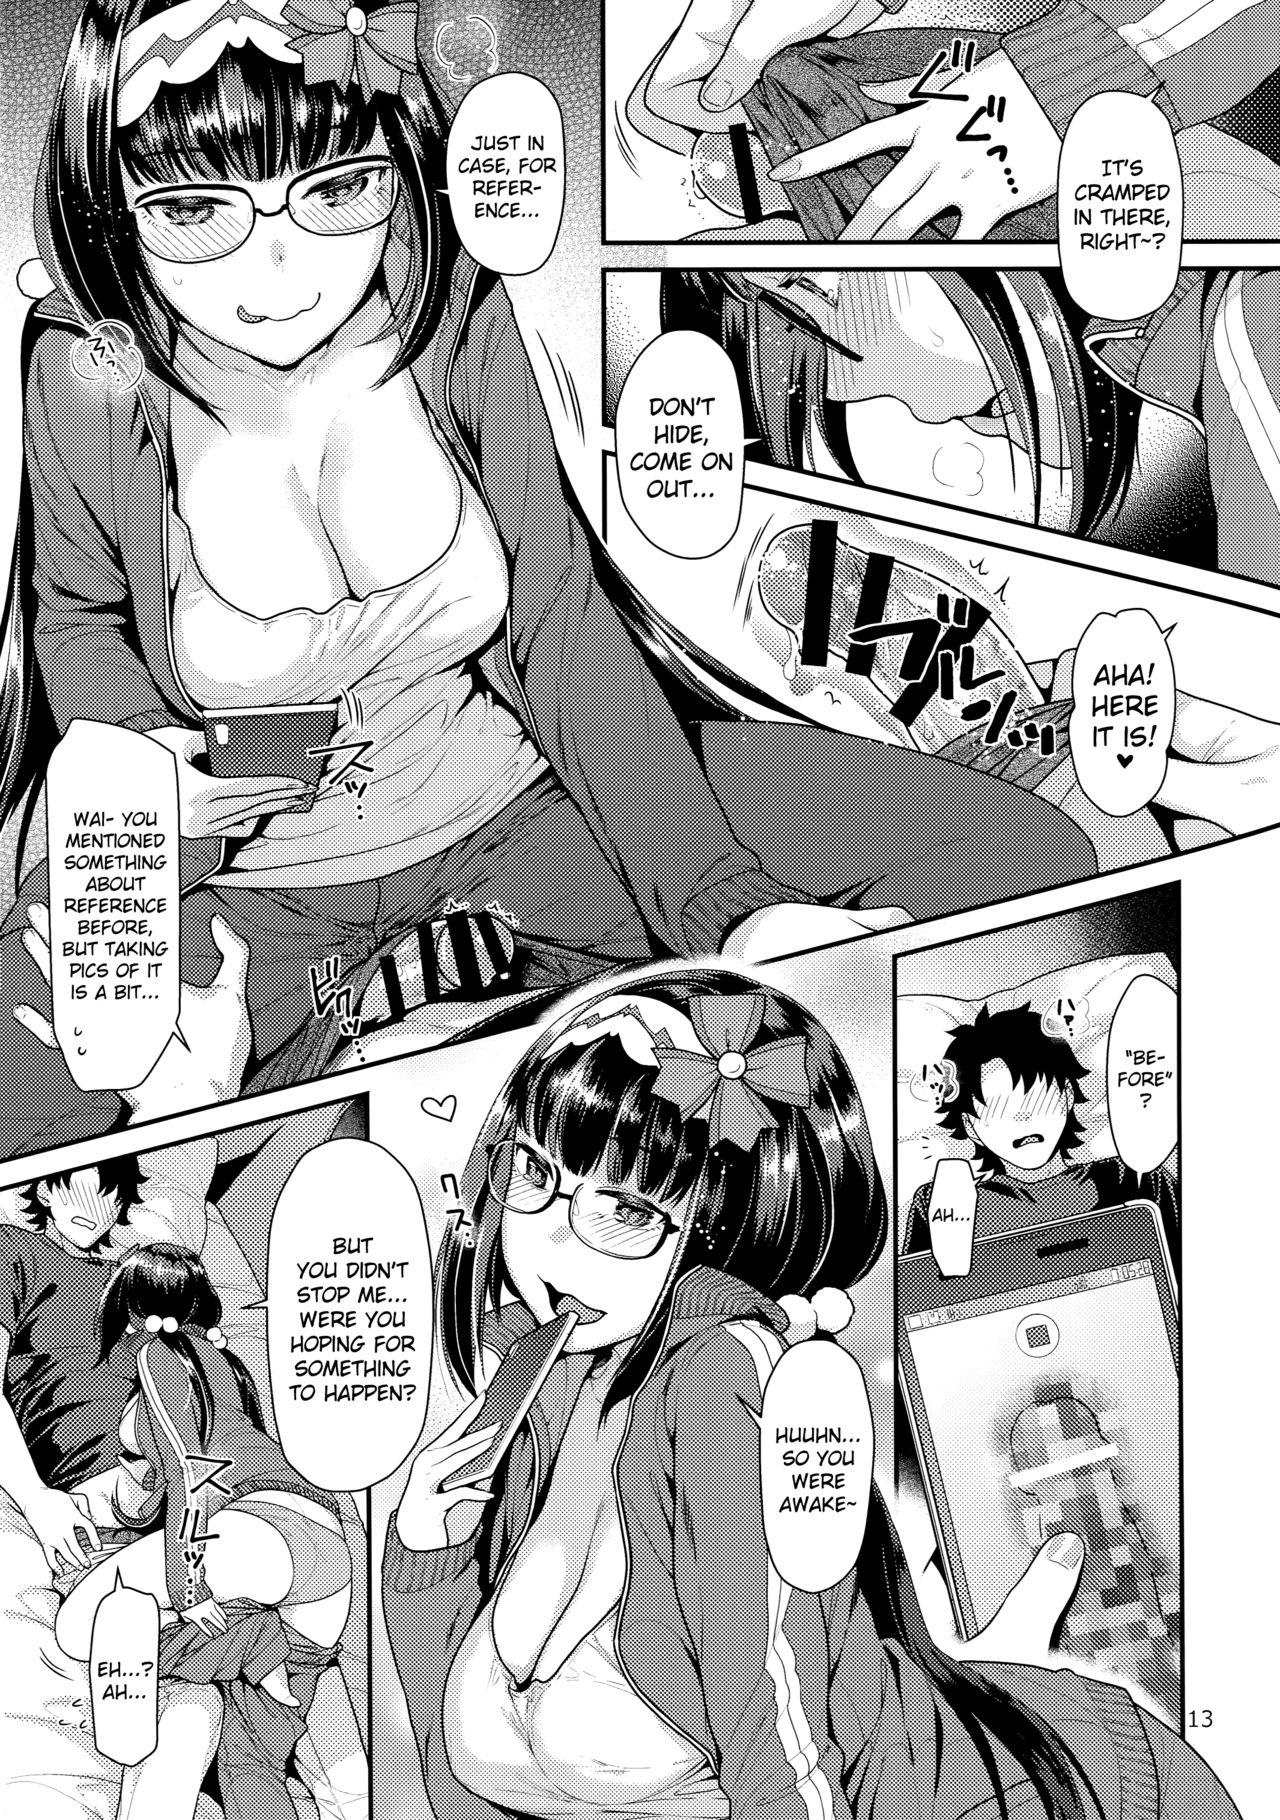 This Midara Midareru Hime Jijou | The Dirty And Confused Girl's Circumstances - Fate grand order Free Rough Porn - Page 12